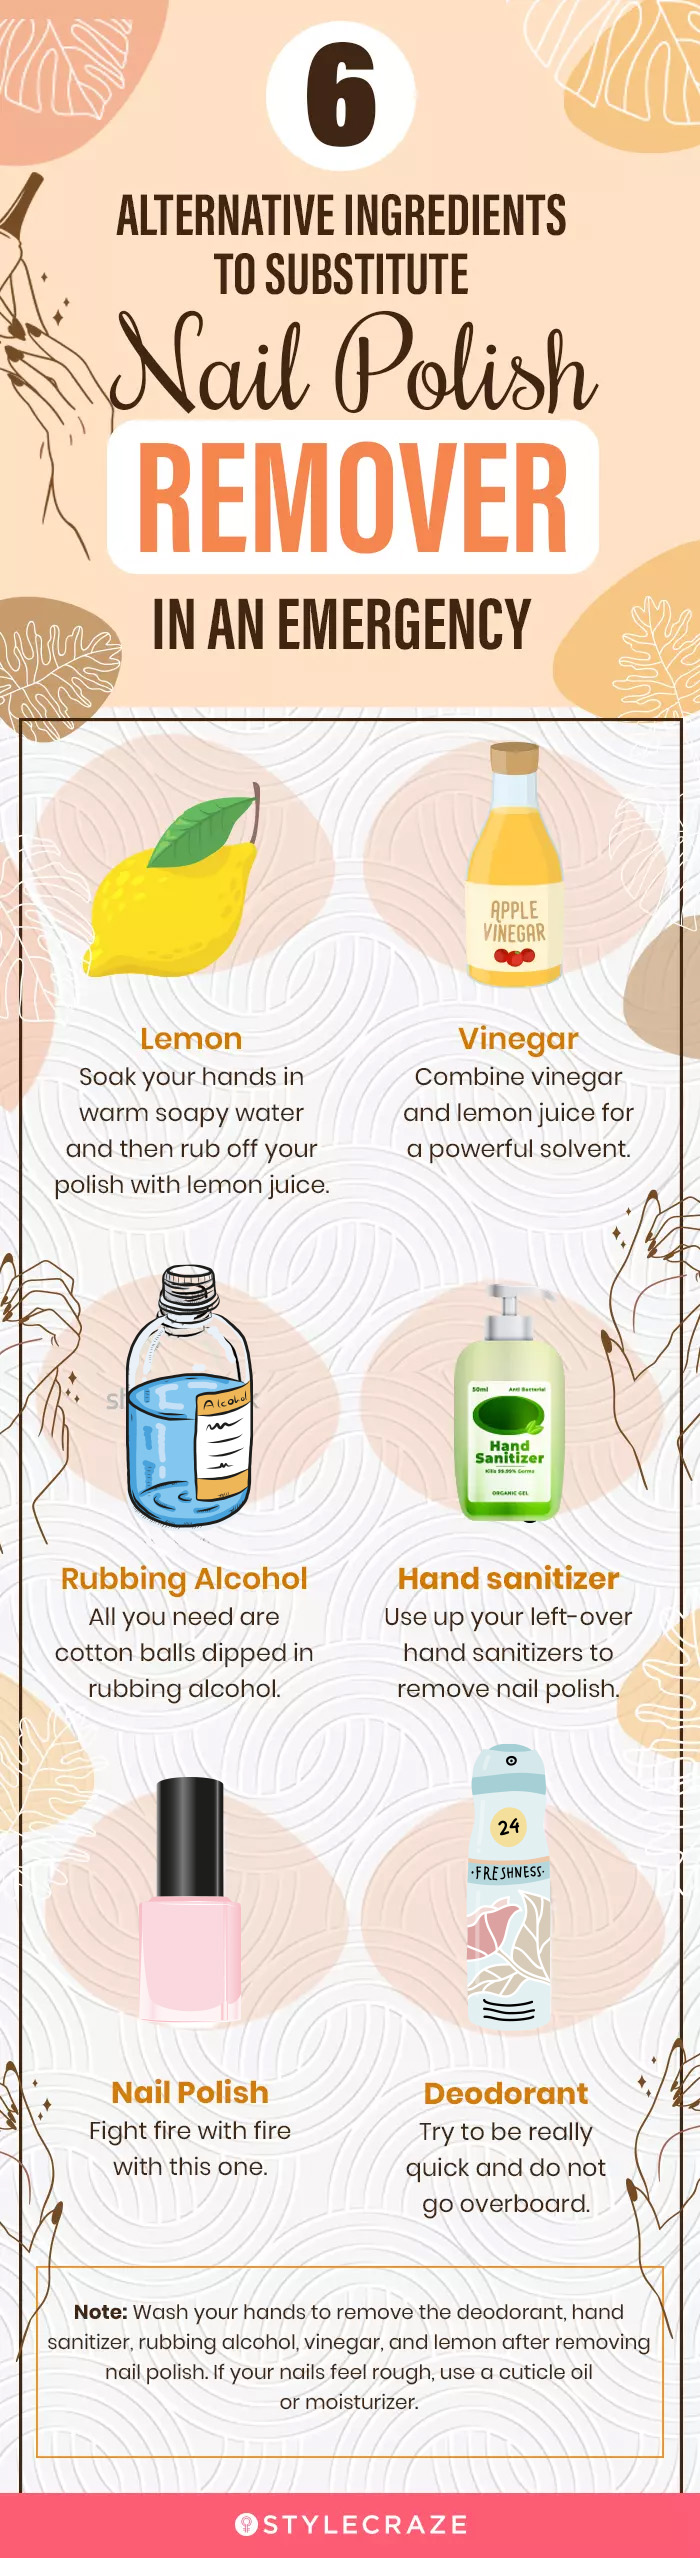 Diy Ideas for Nail Polish Removers Can Save You on an Unfortunate Day! How? Imagine You a  